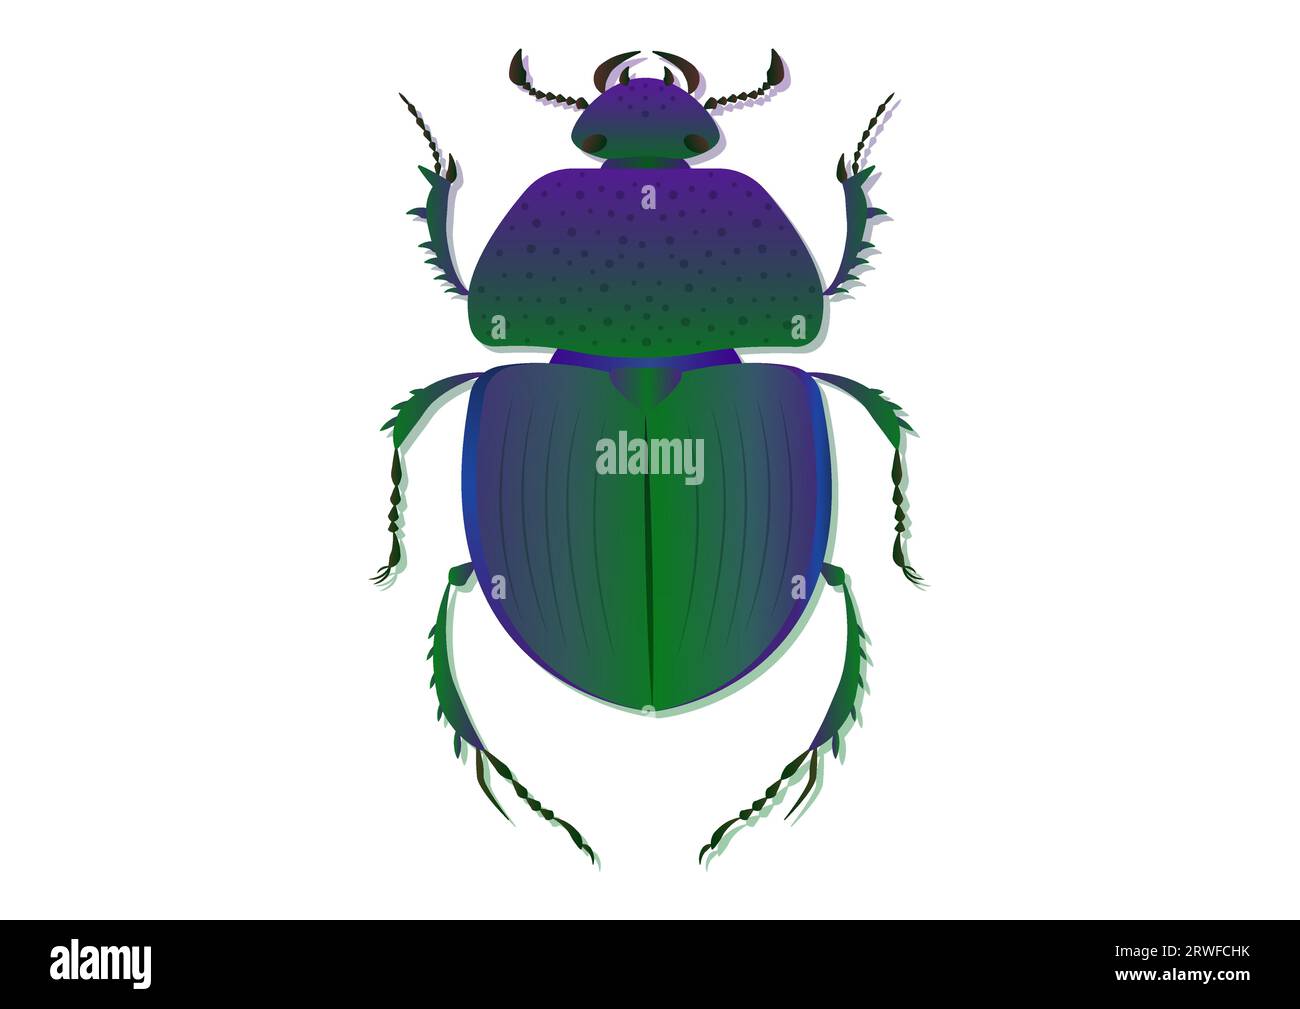 Trypocopris Vernalis Green Beetle Vector Art Isolated on White Background Stock Vector